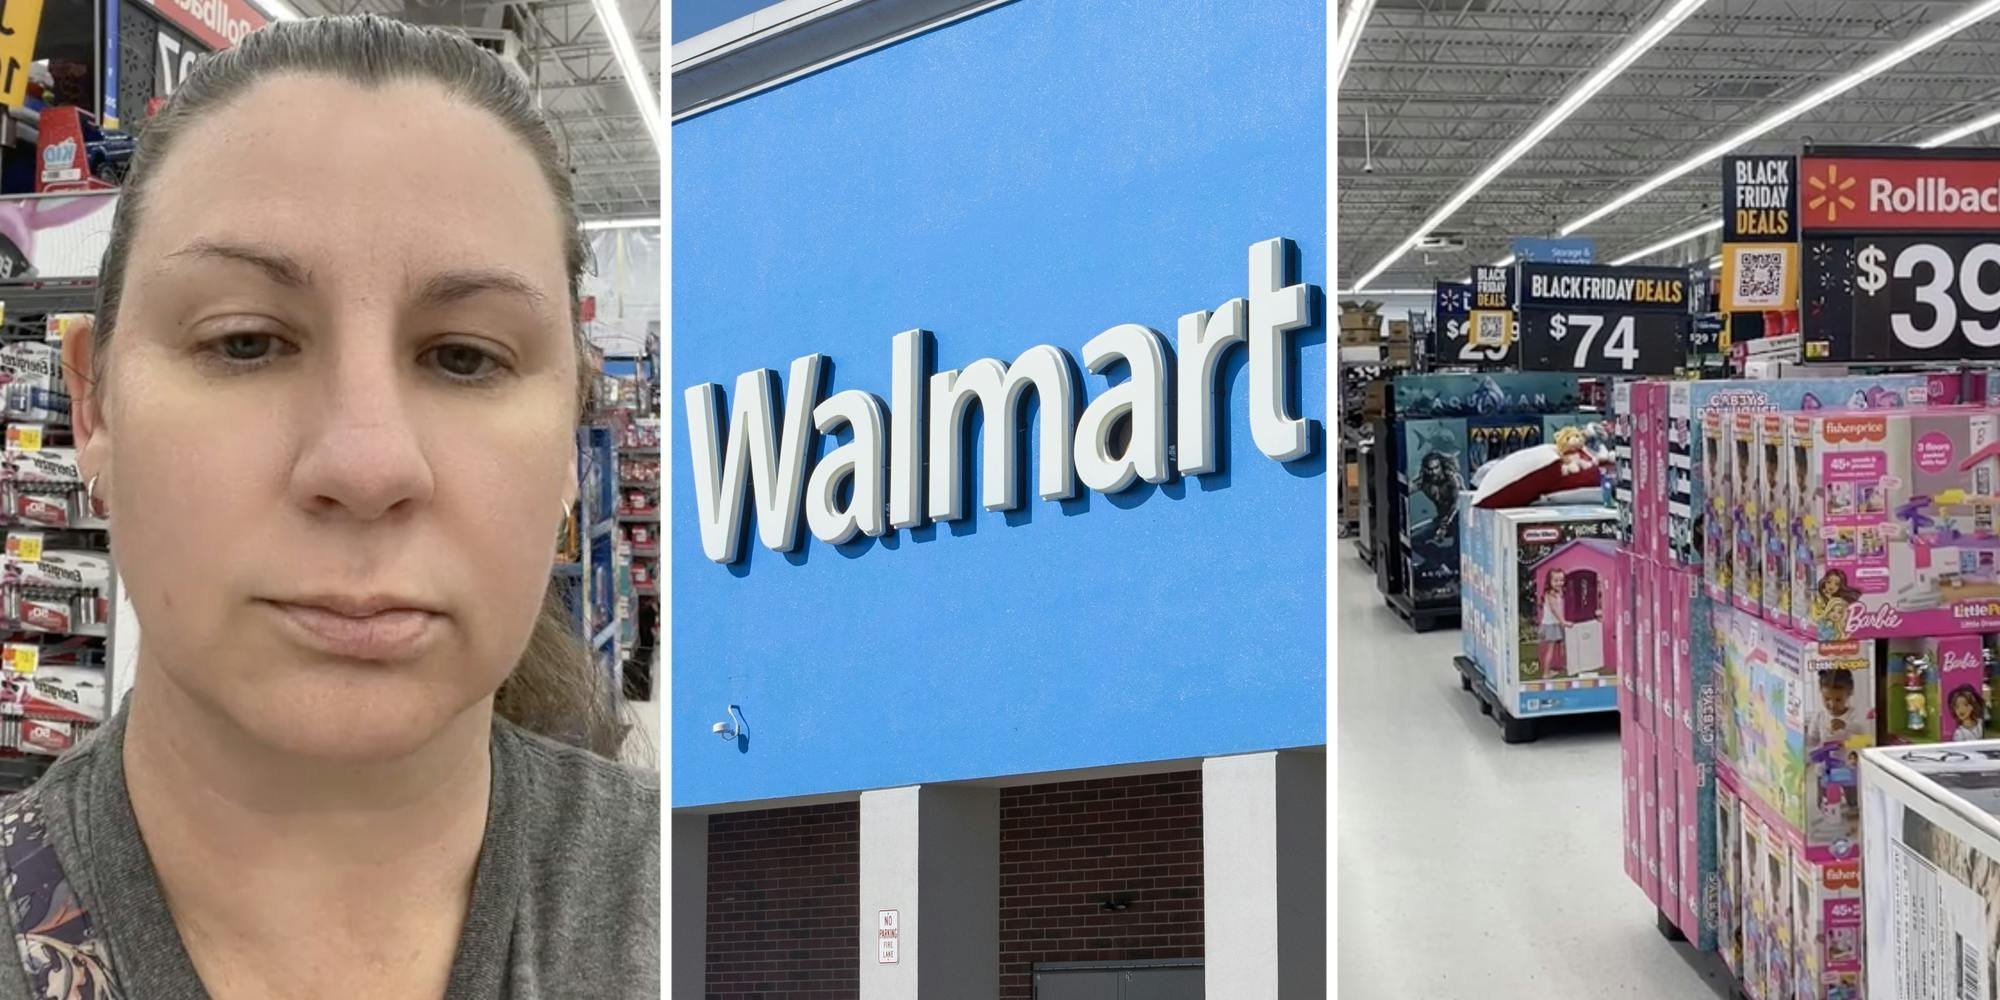 Black Friday Exposed: All The Leftover Stuff At Walmart This Year